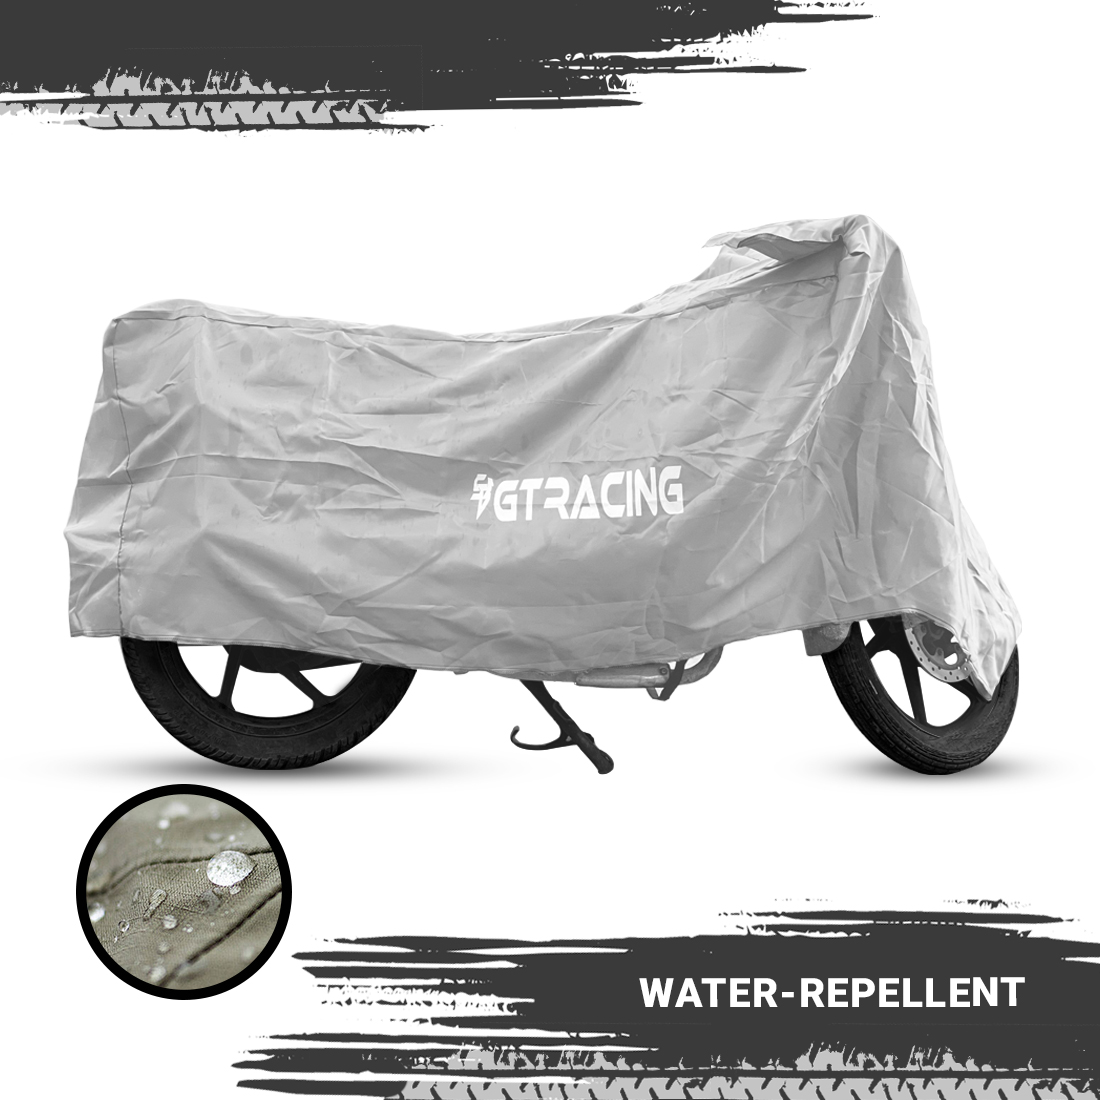 Steelbird Bike Cover GT Racing UV Protection Water-Resistant & Dustproof (Silver Matty), Bike Body Cover With Carry Bag (All Bikes Upto Pulsar 180cc Size)